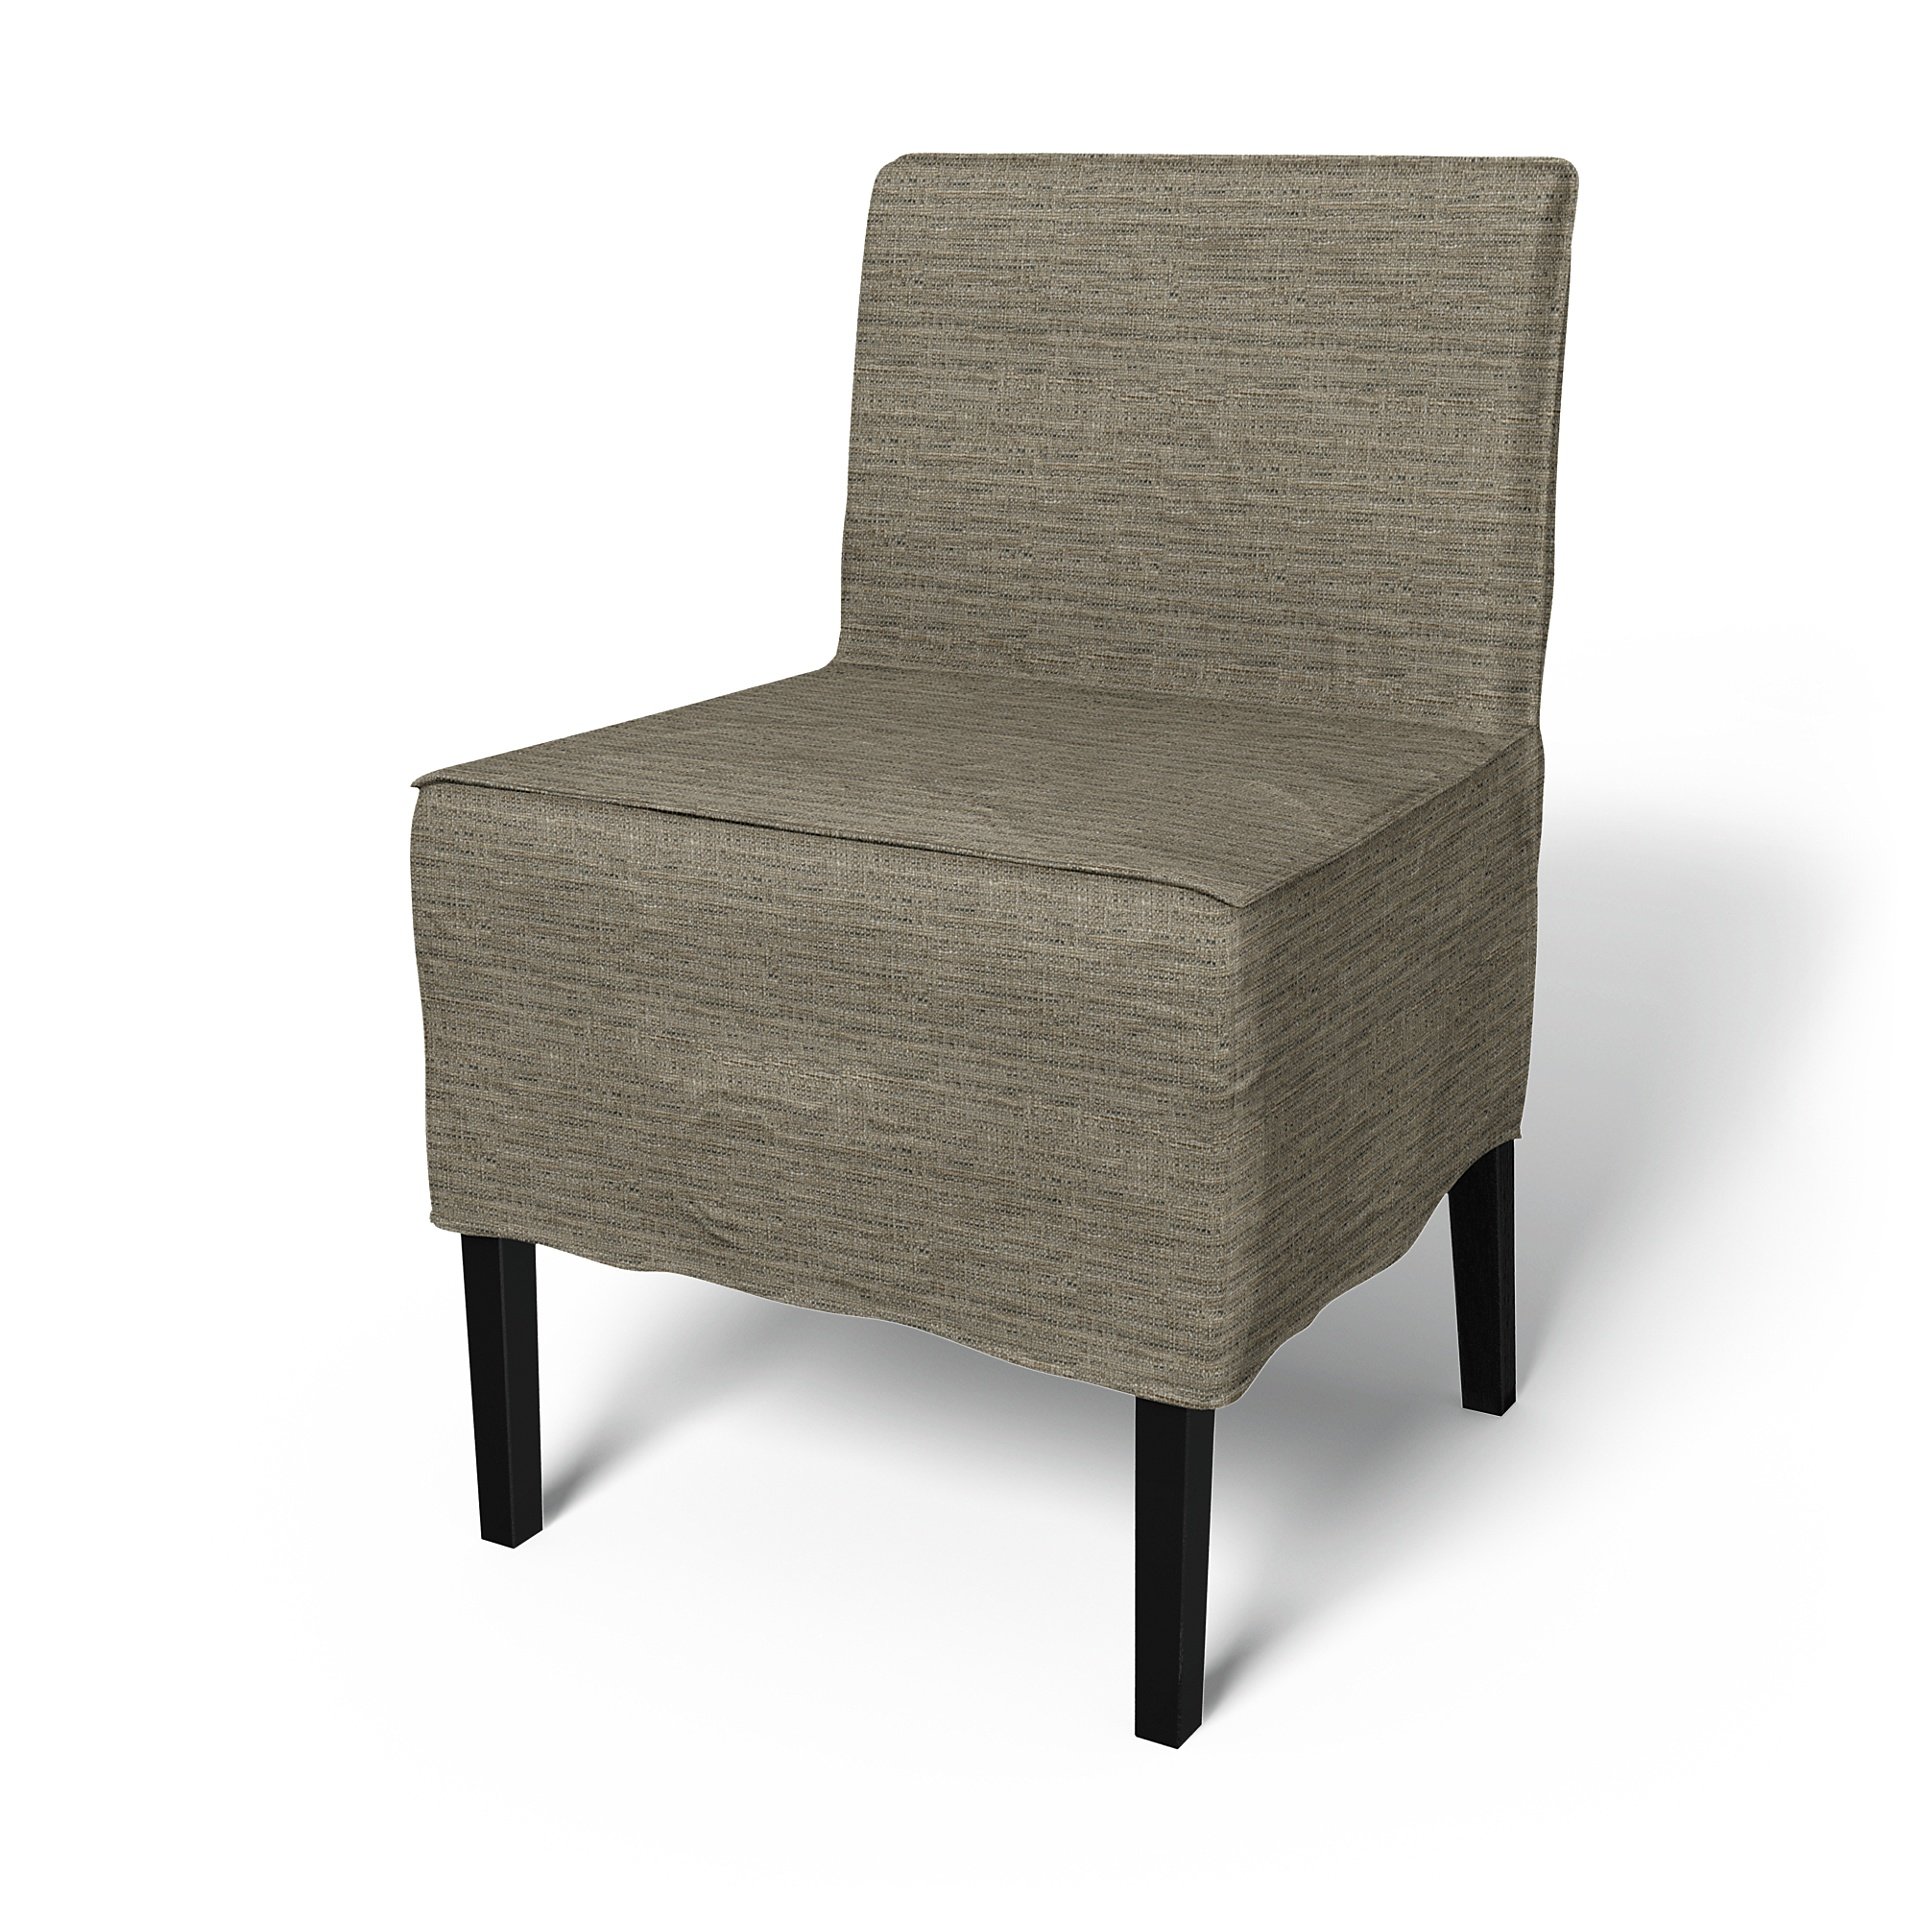 IKEA - Nils Dining Chair Cover, Mole Brown, Boucle & Texture - Bemz